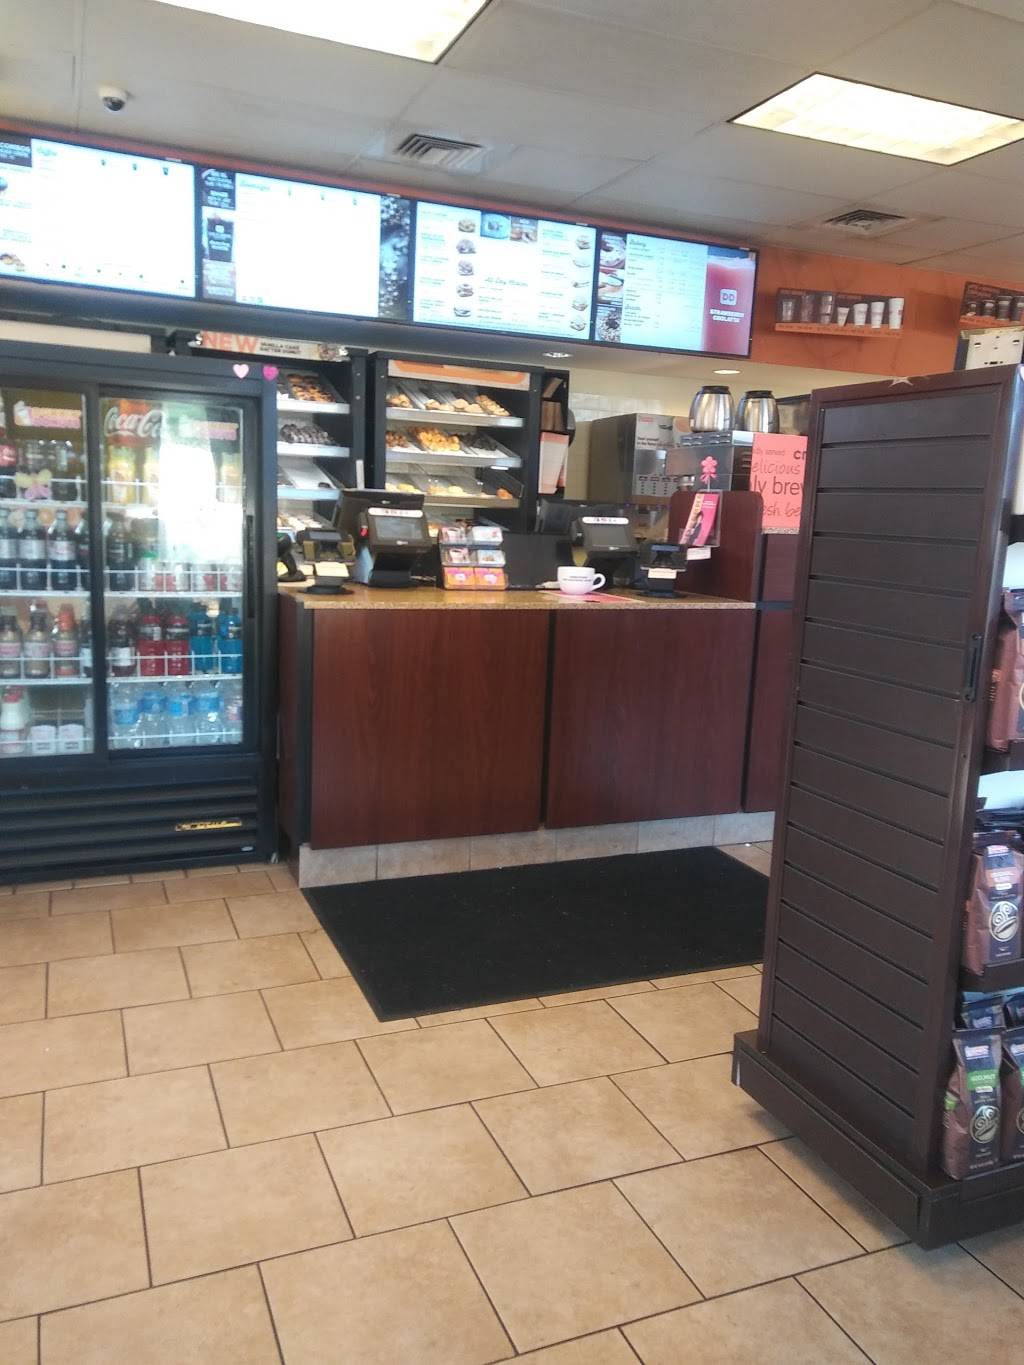 Dunkin Donuts | cafe | 222 W Waters Ave, Tampa, FL 33604, USA | 8139350300 OR +1 813-935-0300